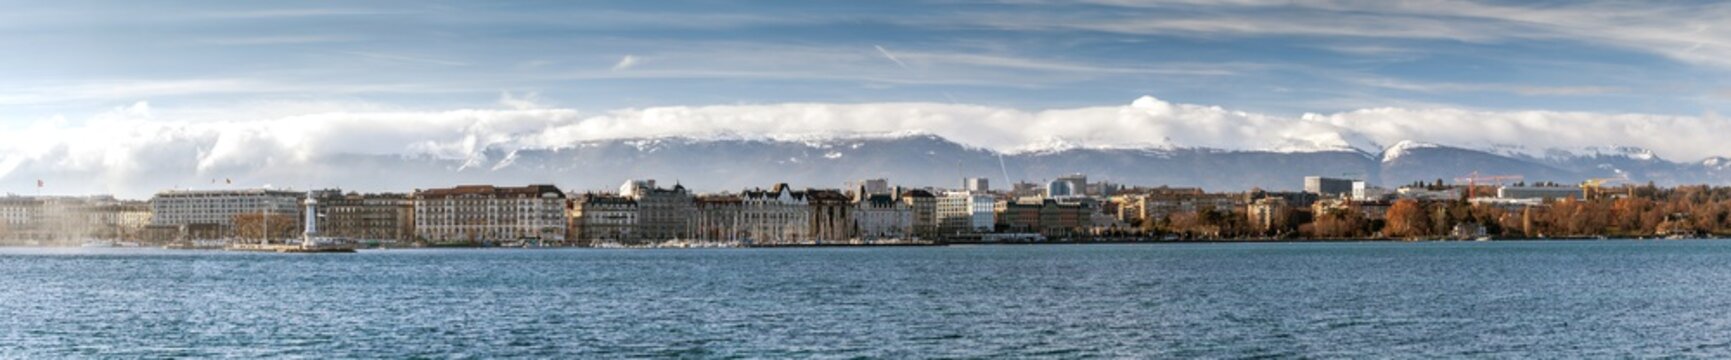 View on Geneva Lake from Quai de Cologny with Phare des Paquis on the left, Geneva, Switzerland, December 2019. Lake on the north side of the Alps, shared between Switzerland and France